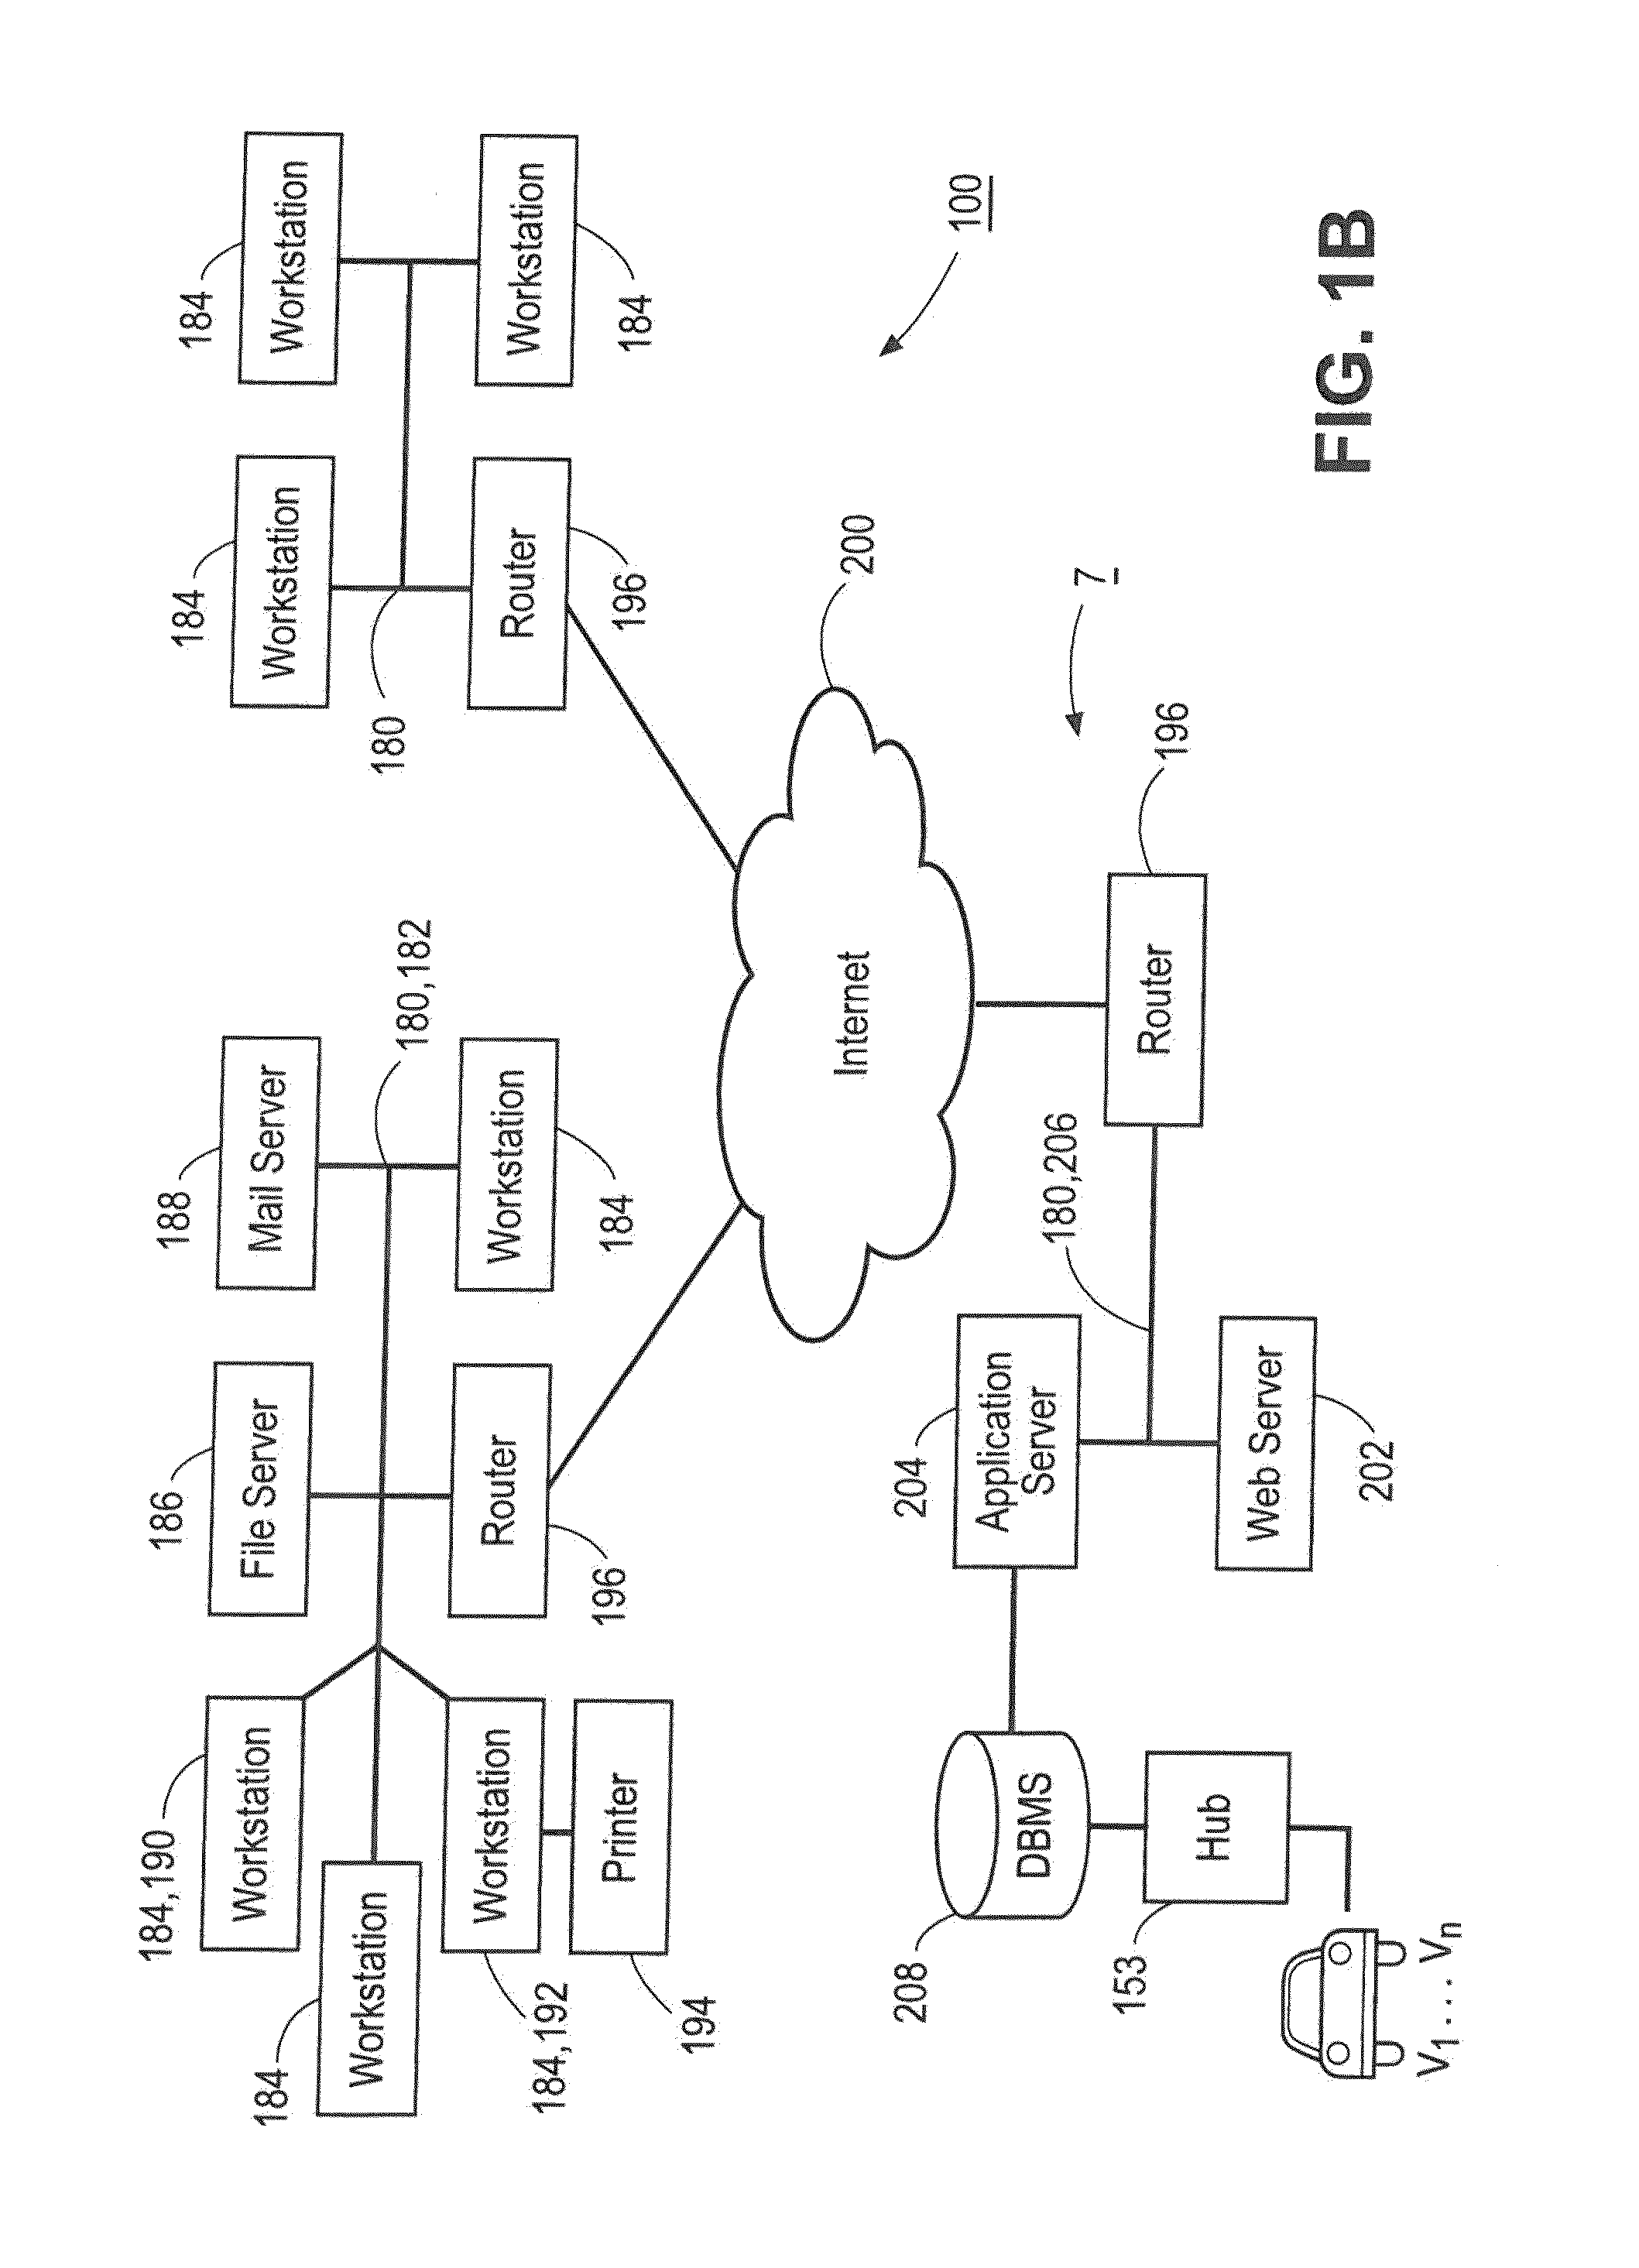 System and method for providing vehicle and fleet profiles and presentations of trends